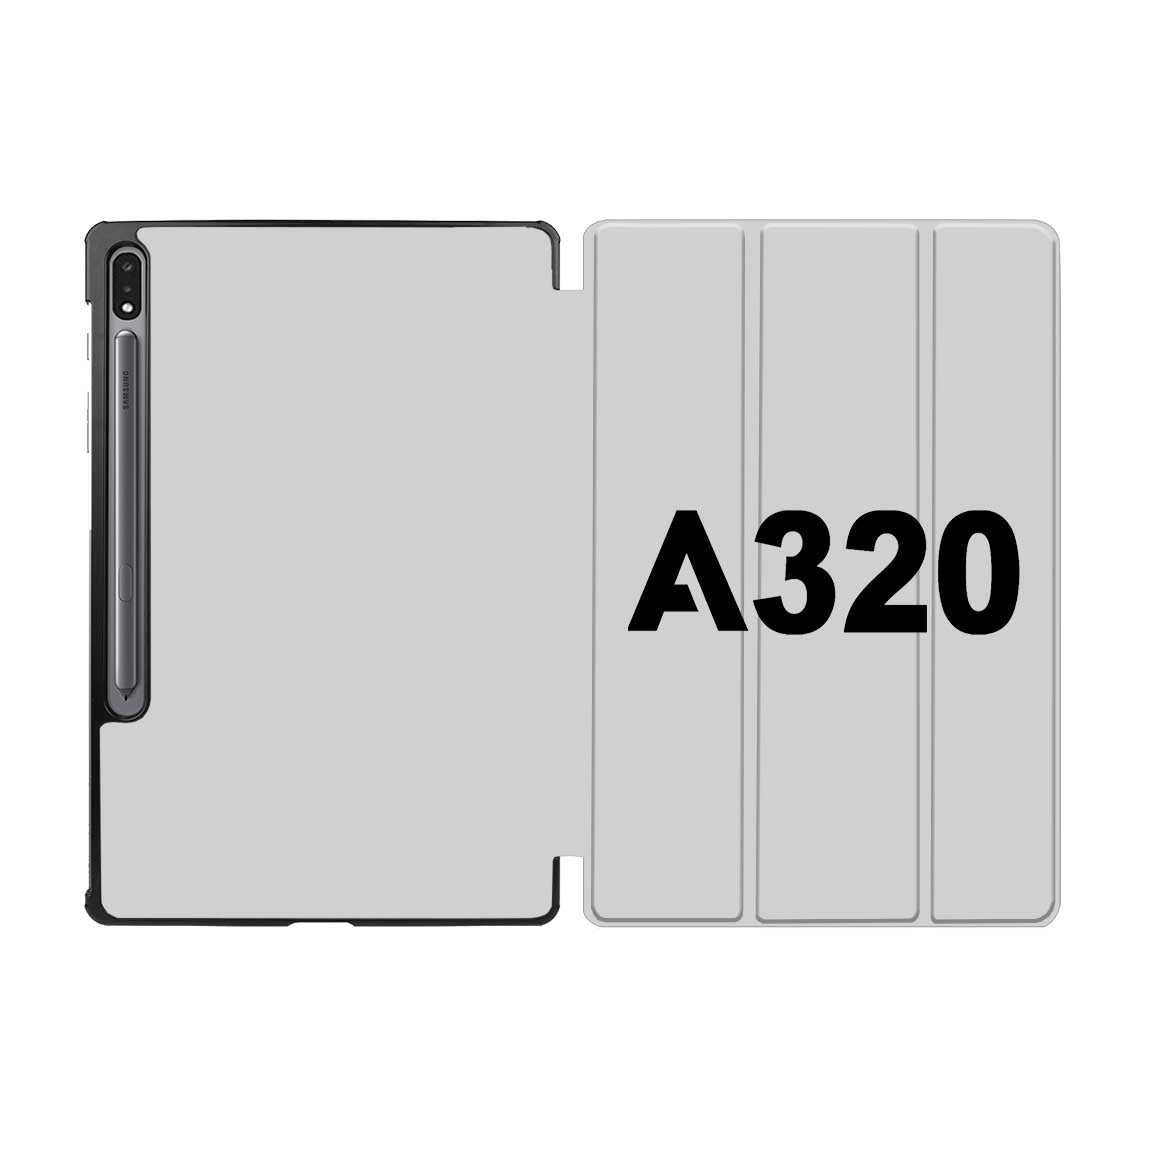 A320 Flat Text Designed Samsung Tablet Cases